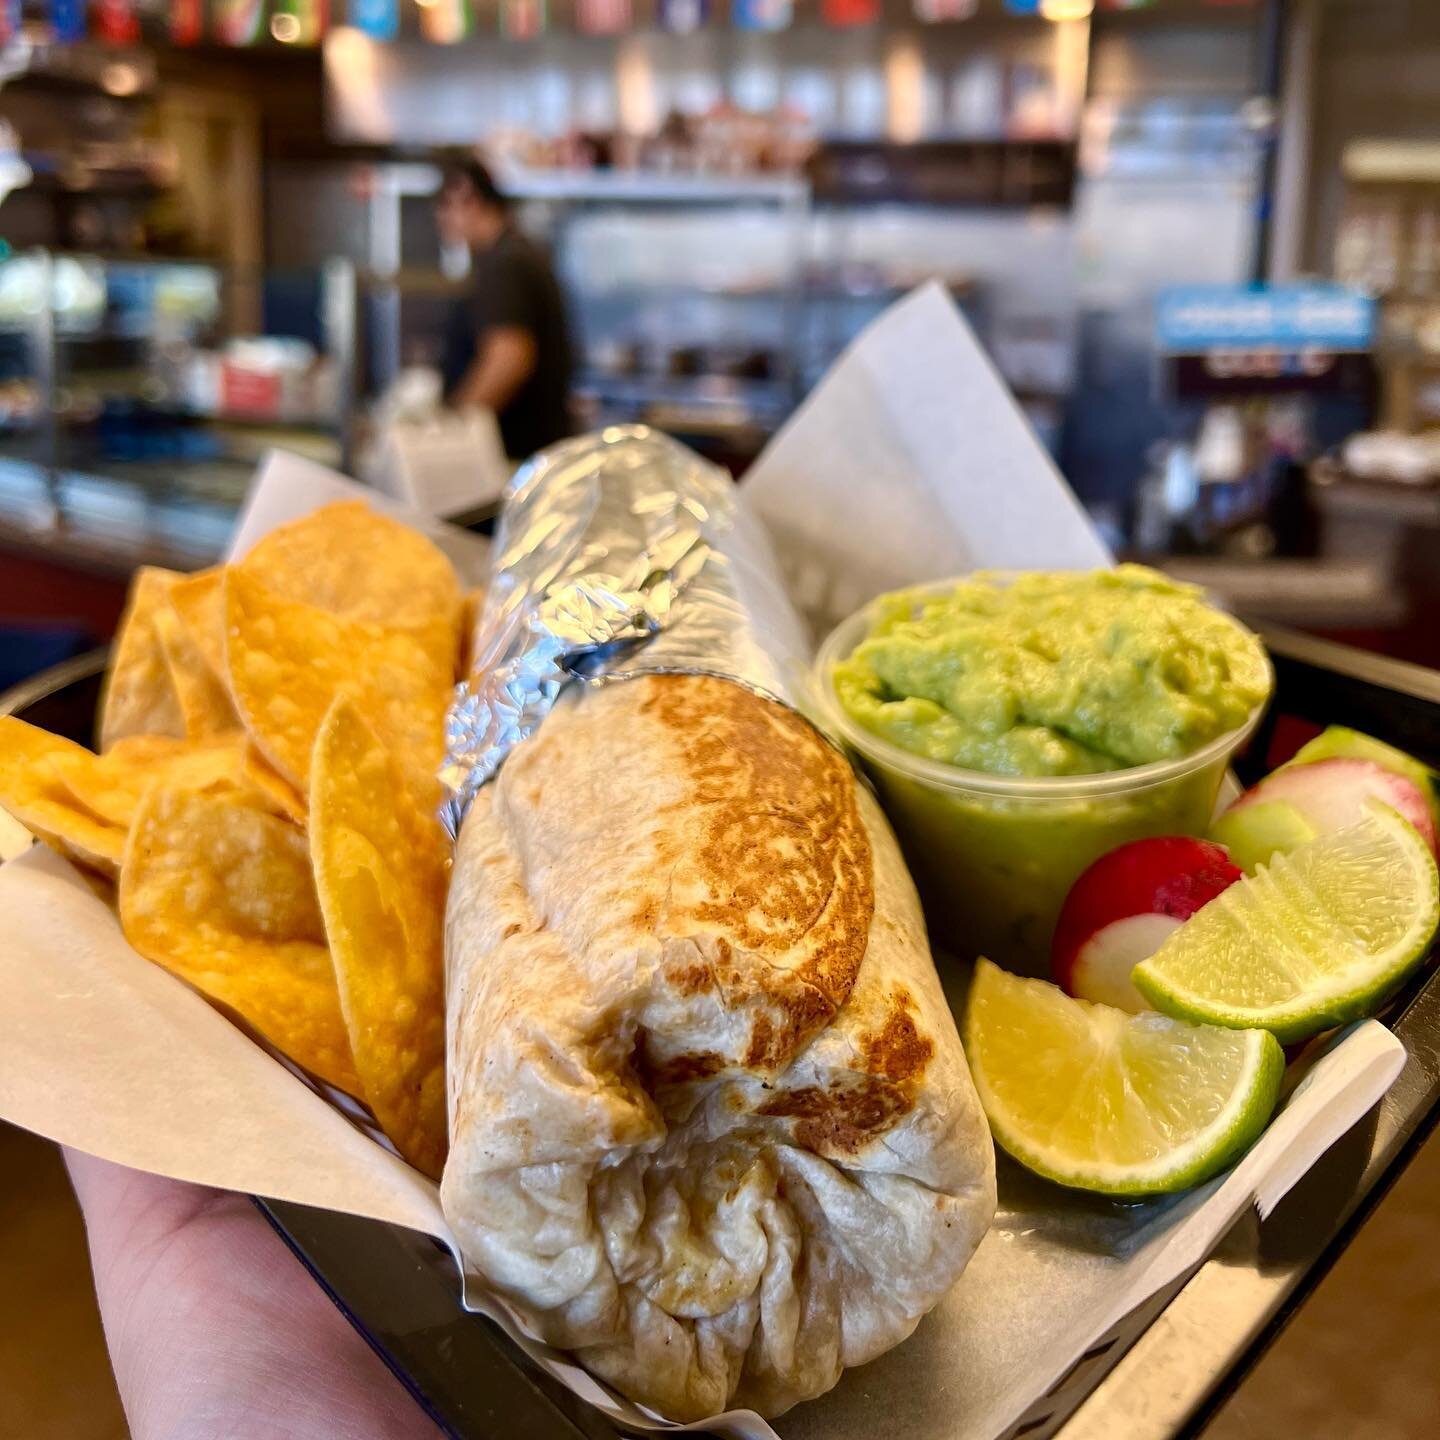 If you haven&rsquo;t tried our Premium Burritos, TODAY might just be your day! 🎉

We&rsquo;re open 10am-5pm and you can call to place your order or schedule it online and pick up ✅

📞 (925) 267-2220
💻 www.tacoandcompany.com/order

Pro tip: grab a 